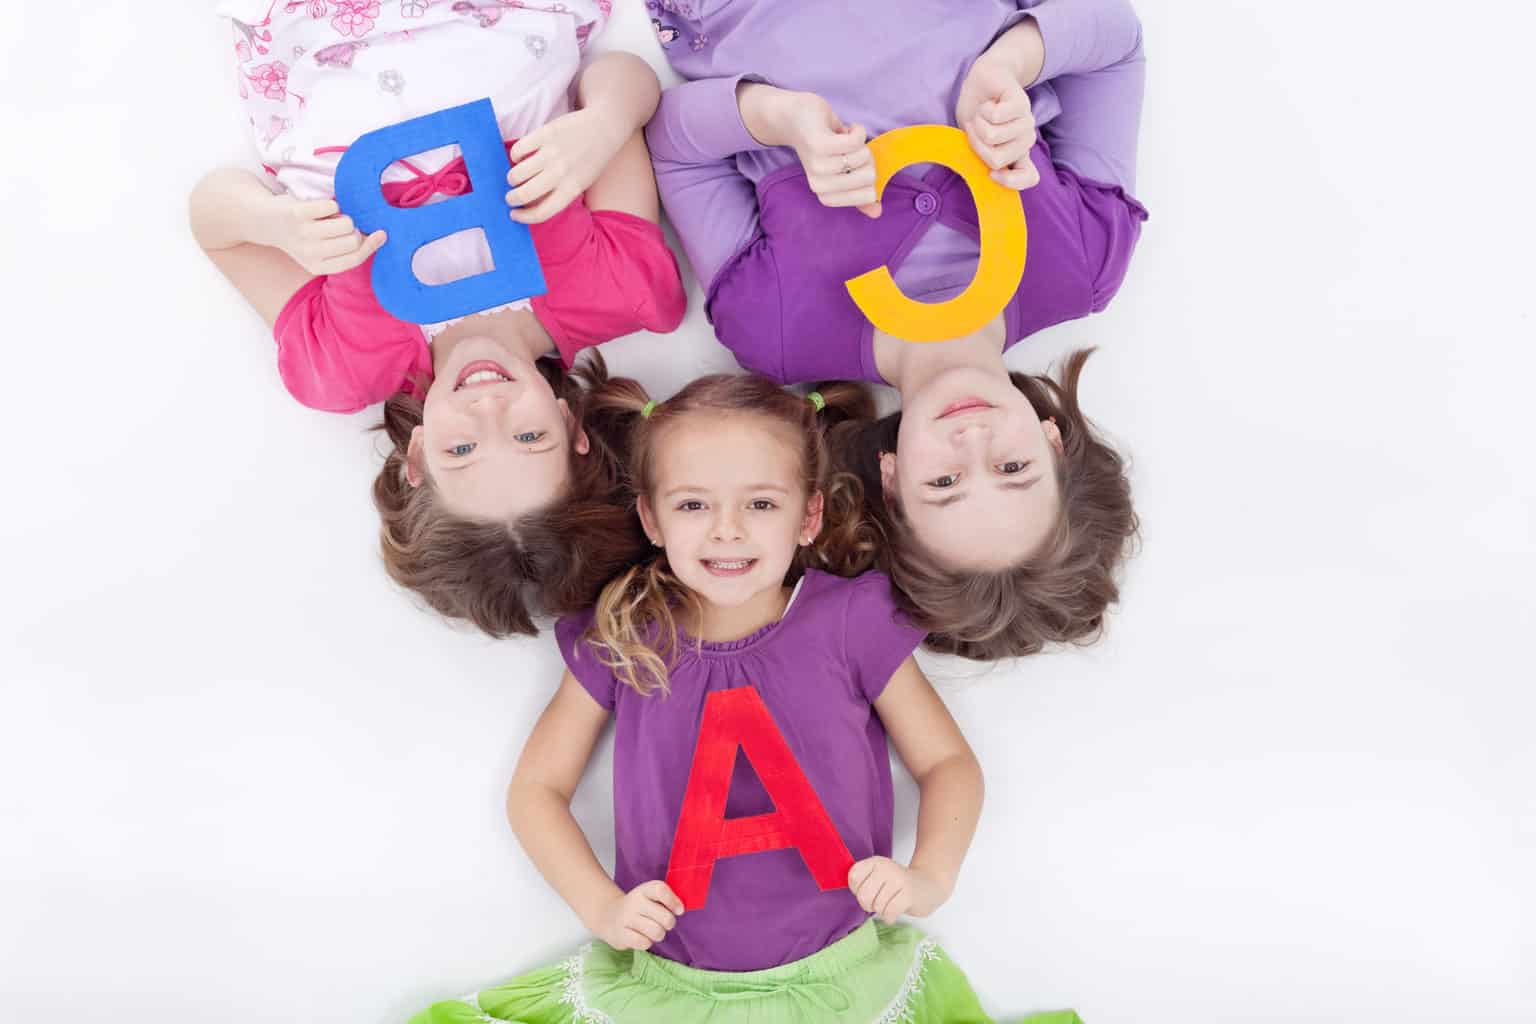 how to teach alphabets to preschoolers in a fun way